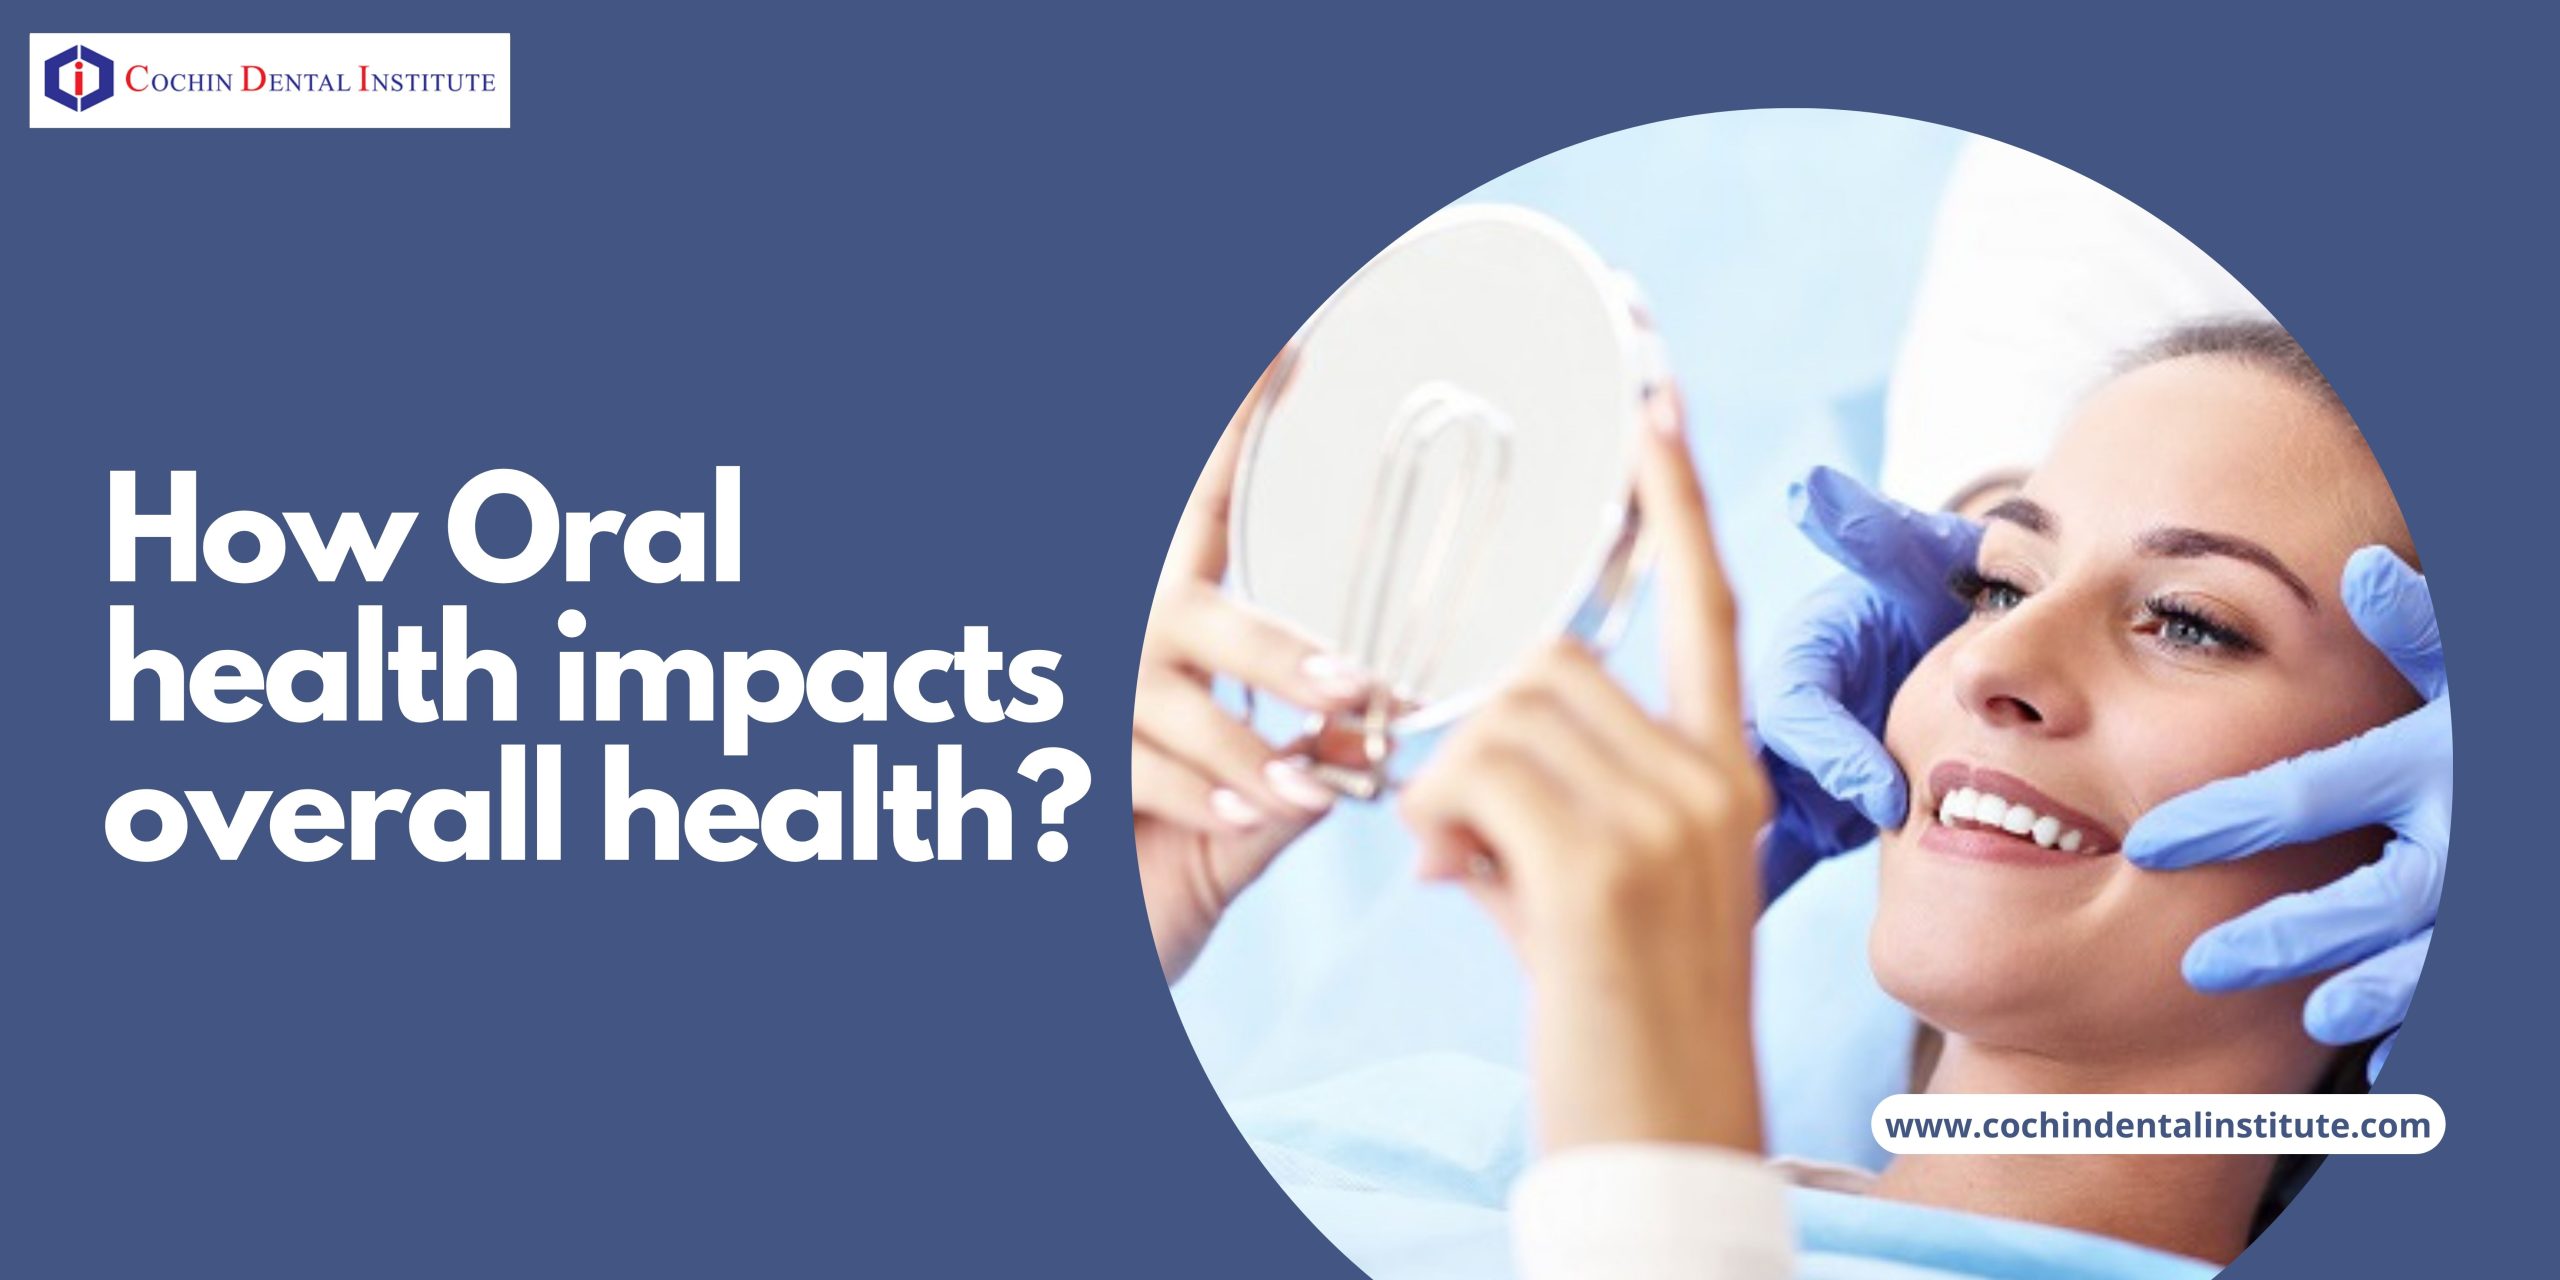 How Oral health impacts overall health